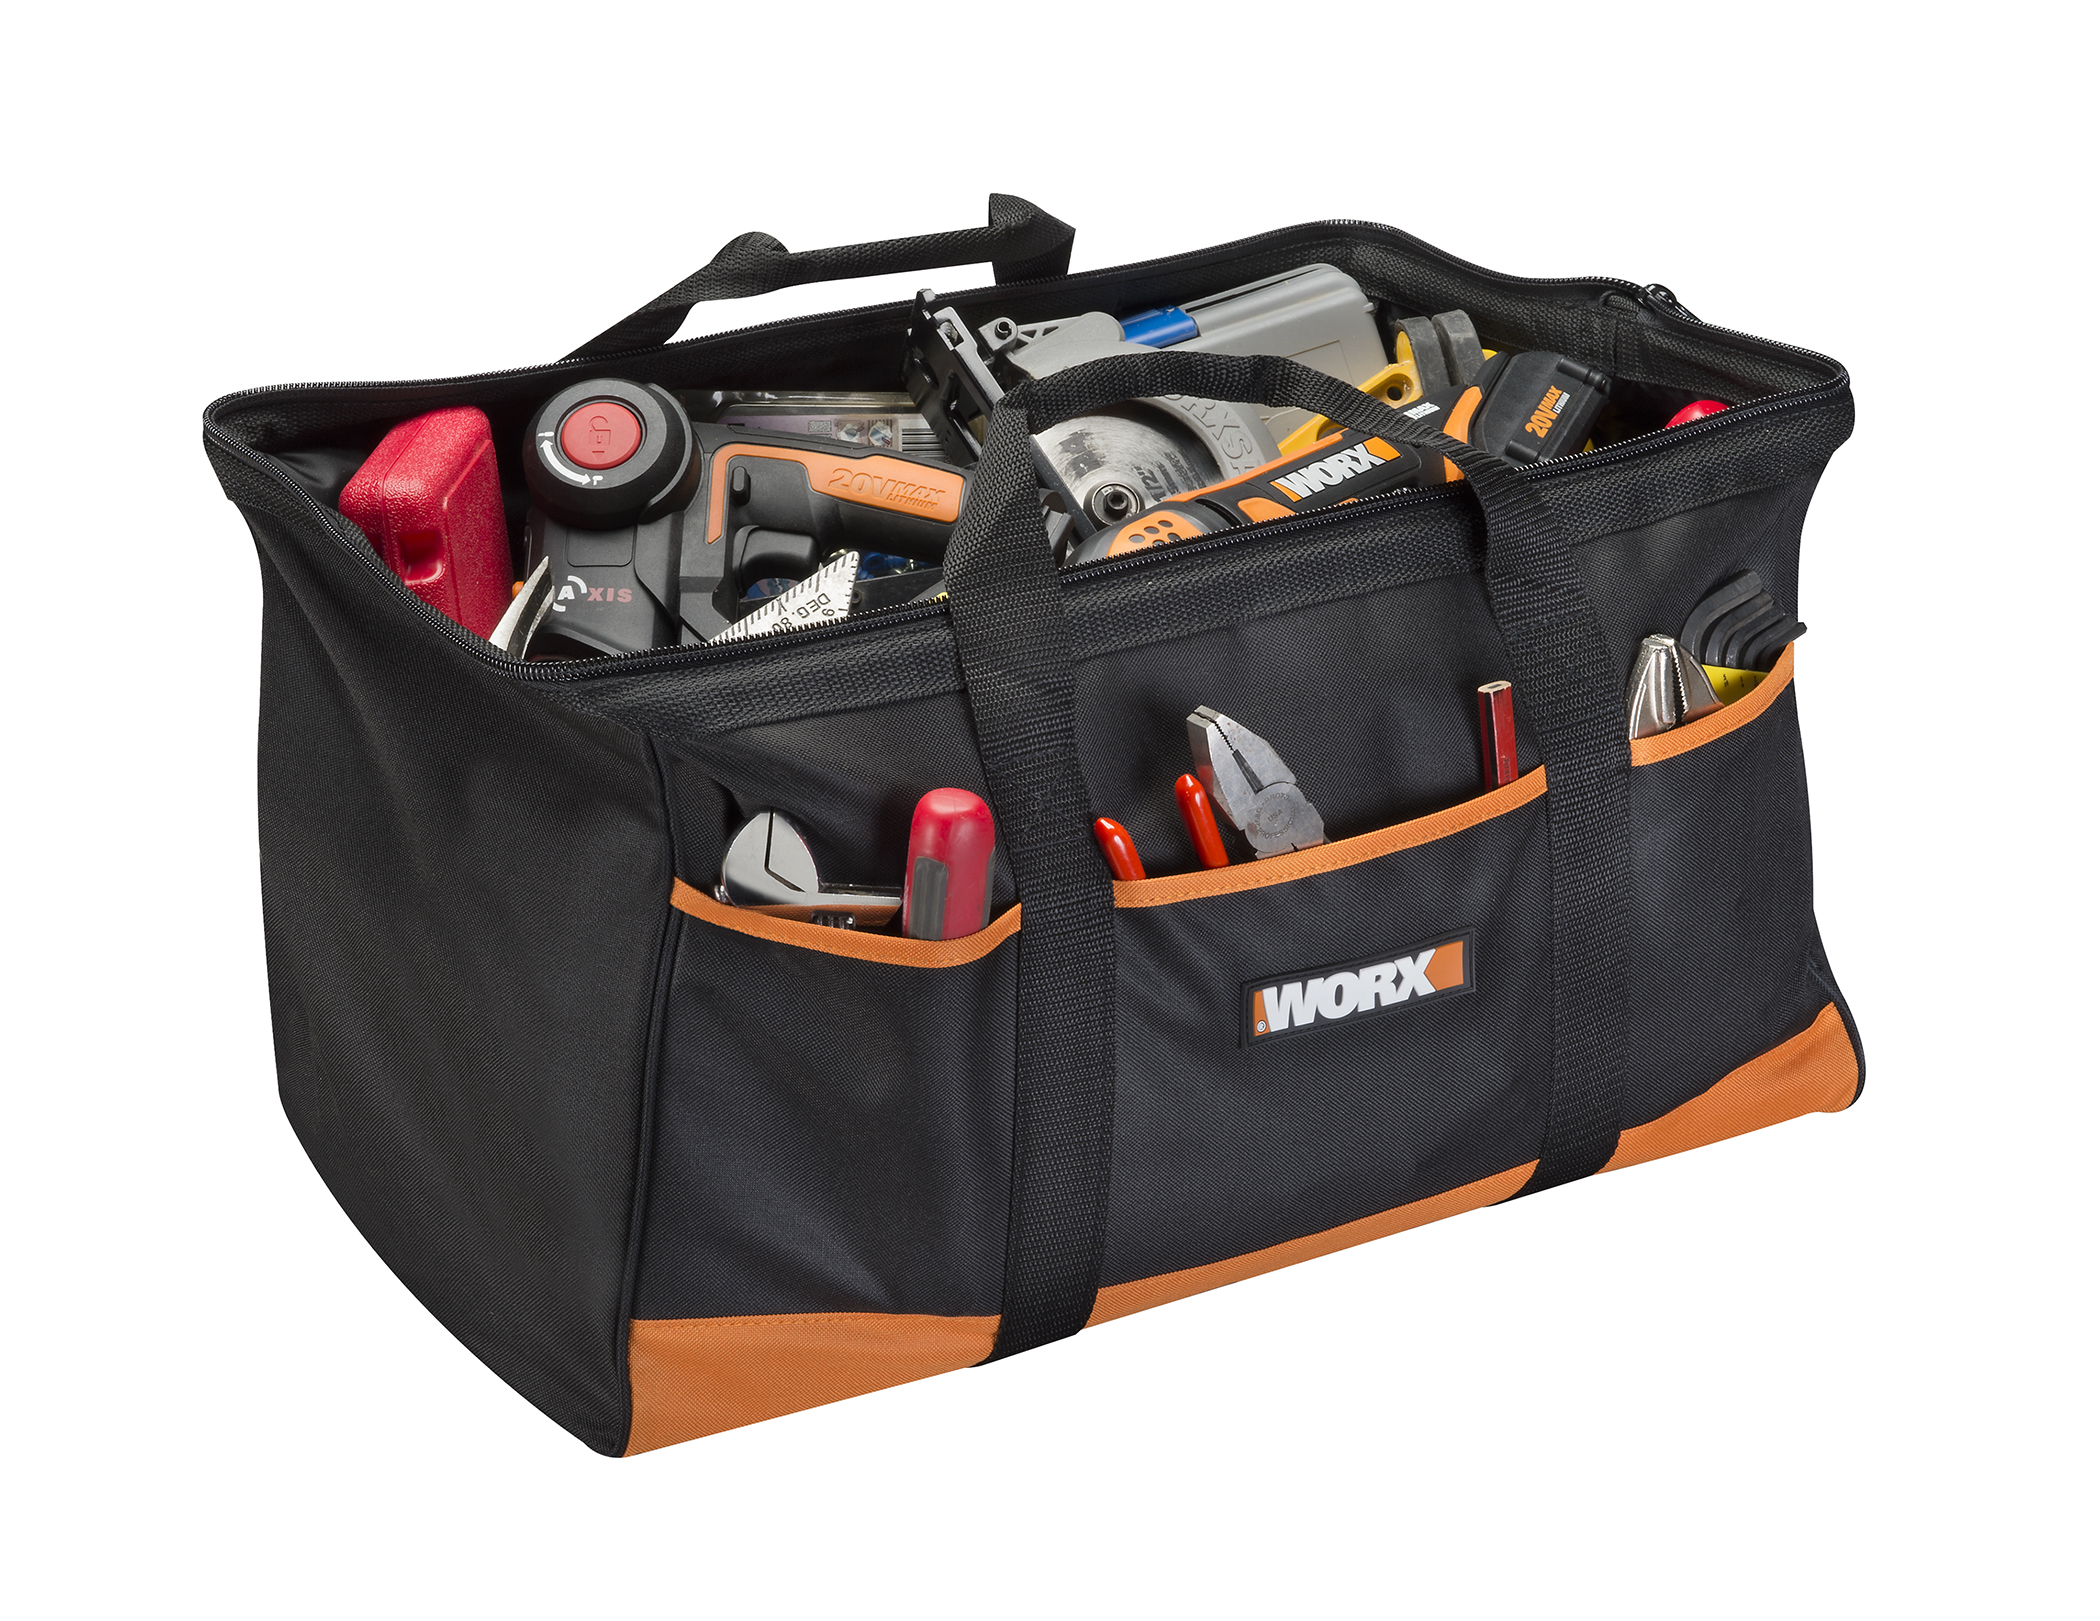 WORX Large Zippered Tool Tote has multiple interior and exterior pockets to fit tools and accessories of various sizes.